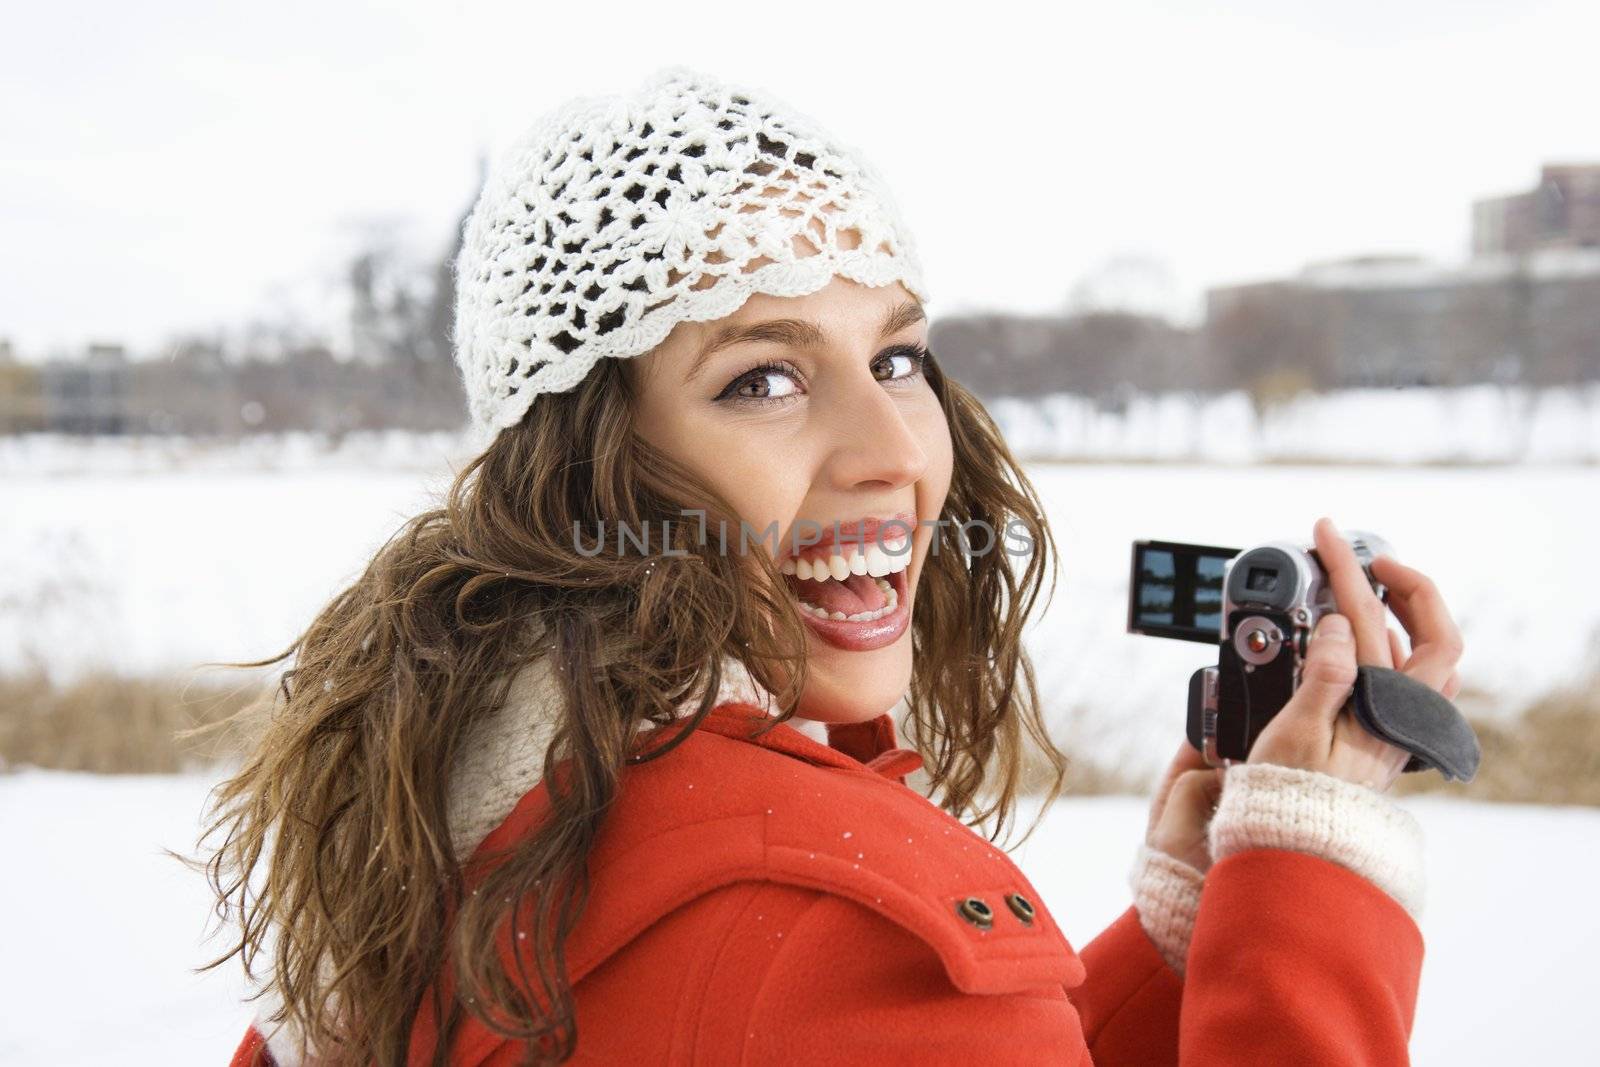 Smiling Caucasian young adult female in winter clothing holding video camera and looking over shoulder at viewer.